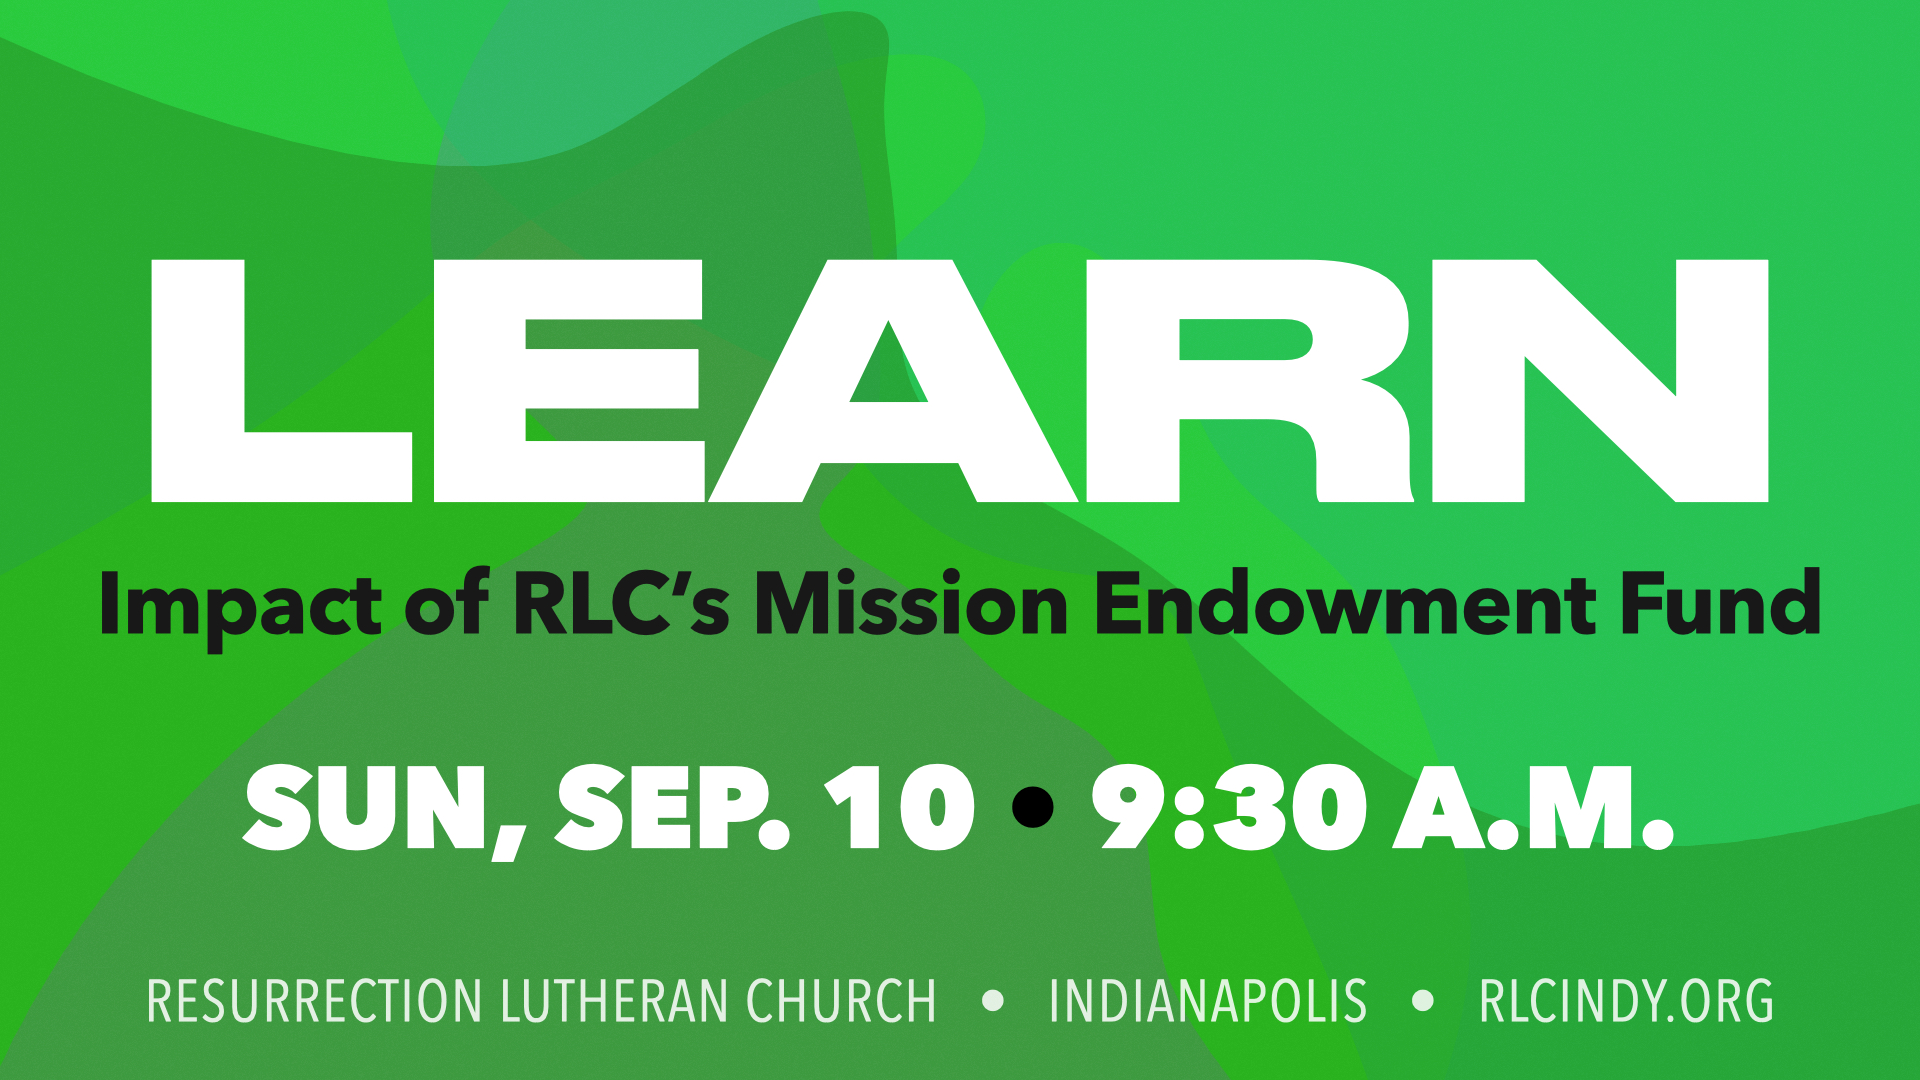 Learn about the impact of Resurrection Lutheran Church's Mission Endowment Fund on Sunday, Sep. 10 at 9:30 a.m.